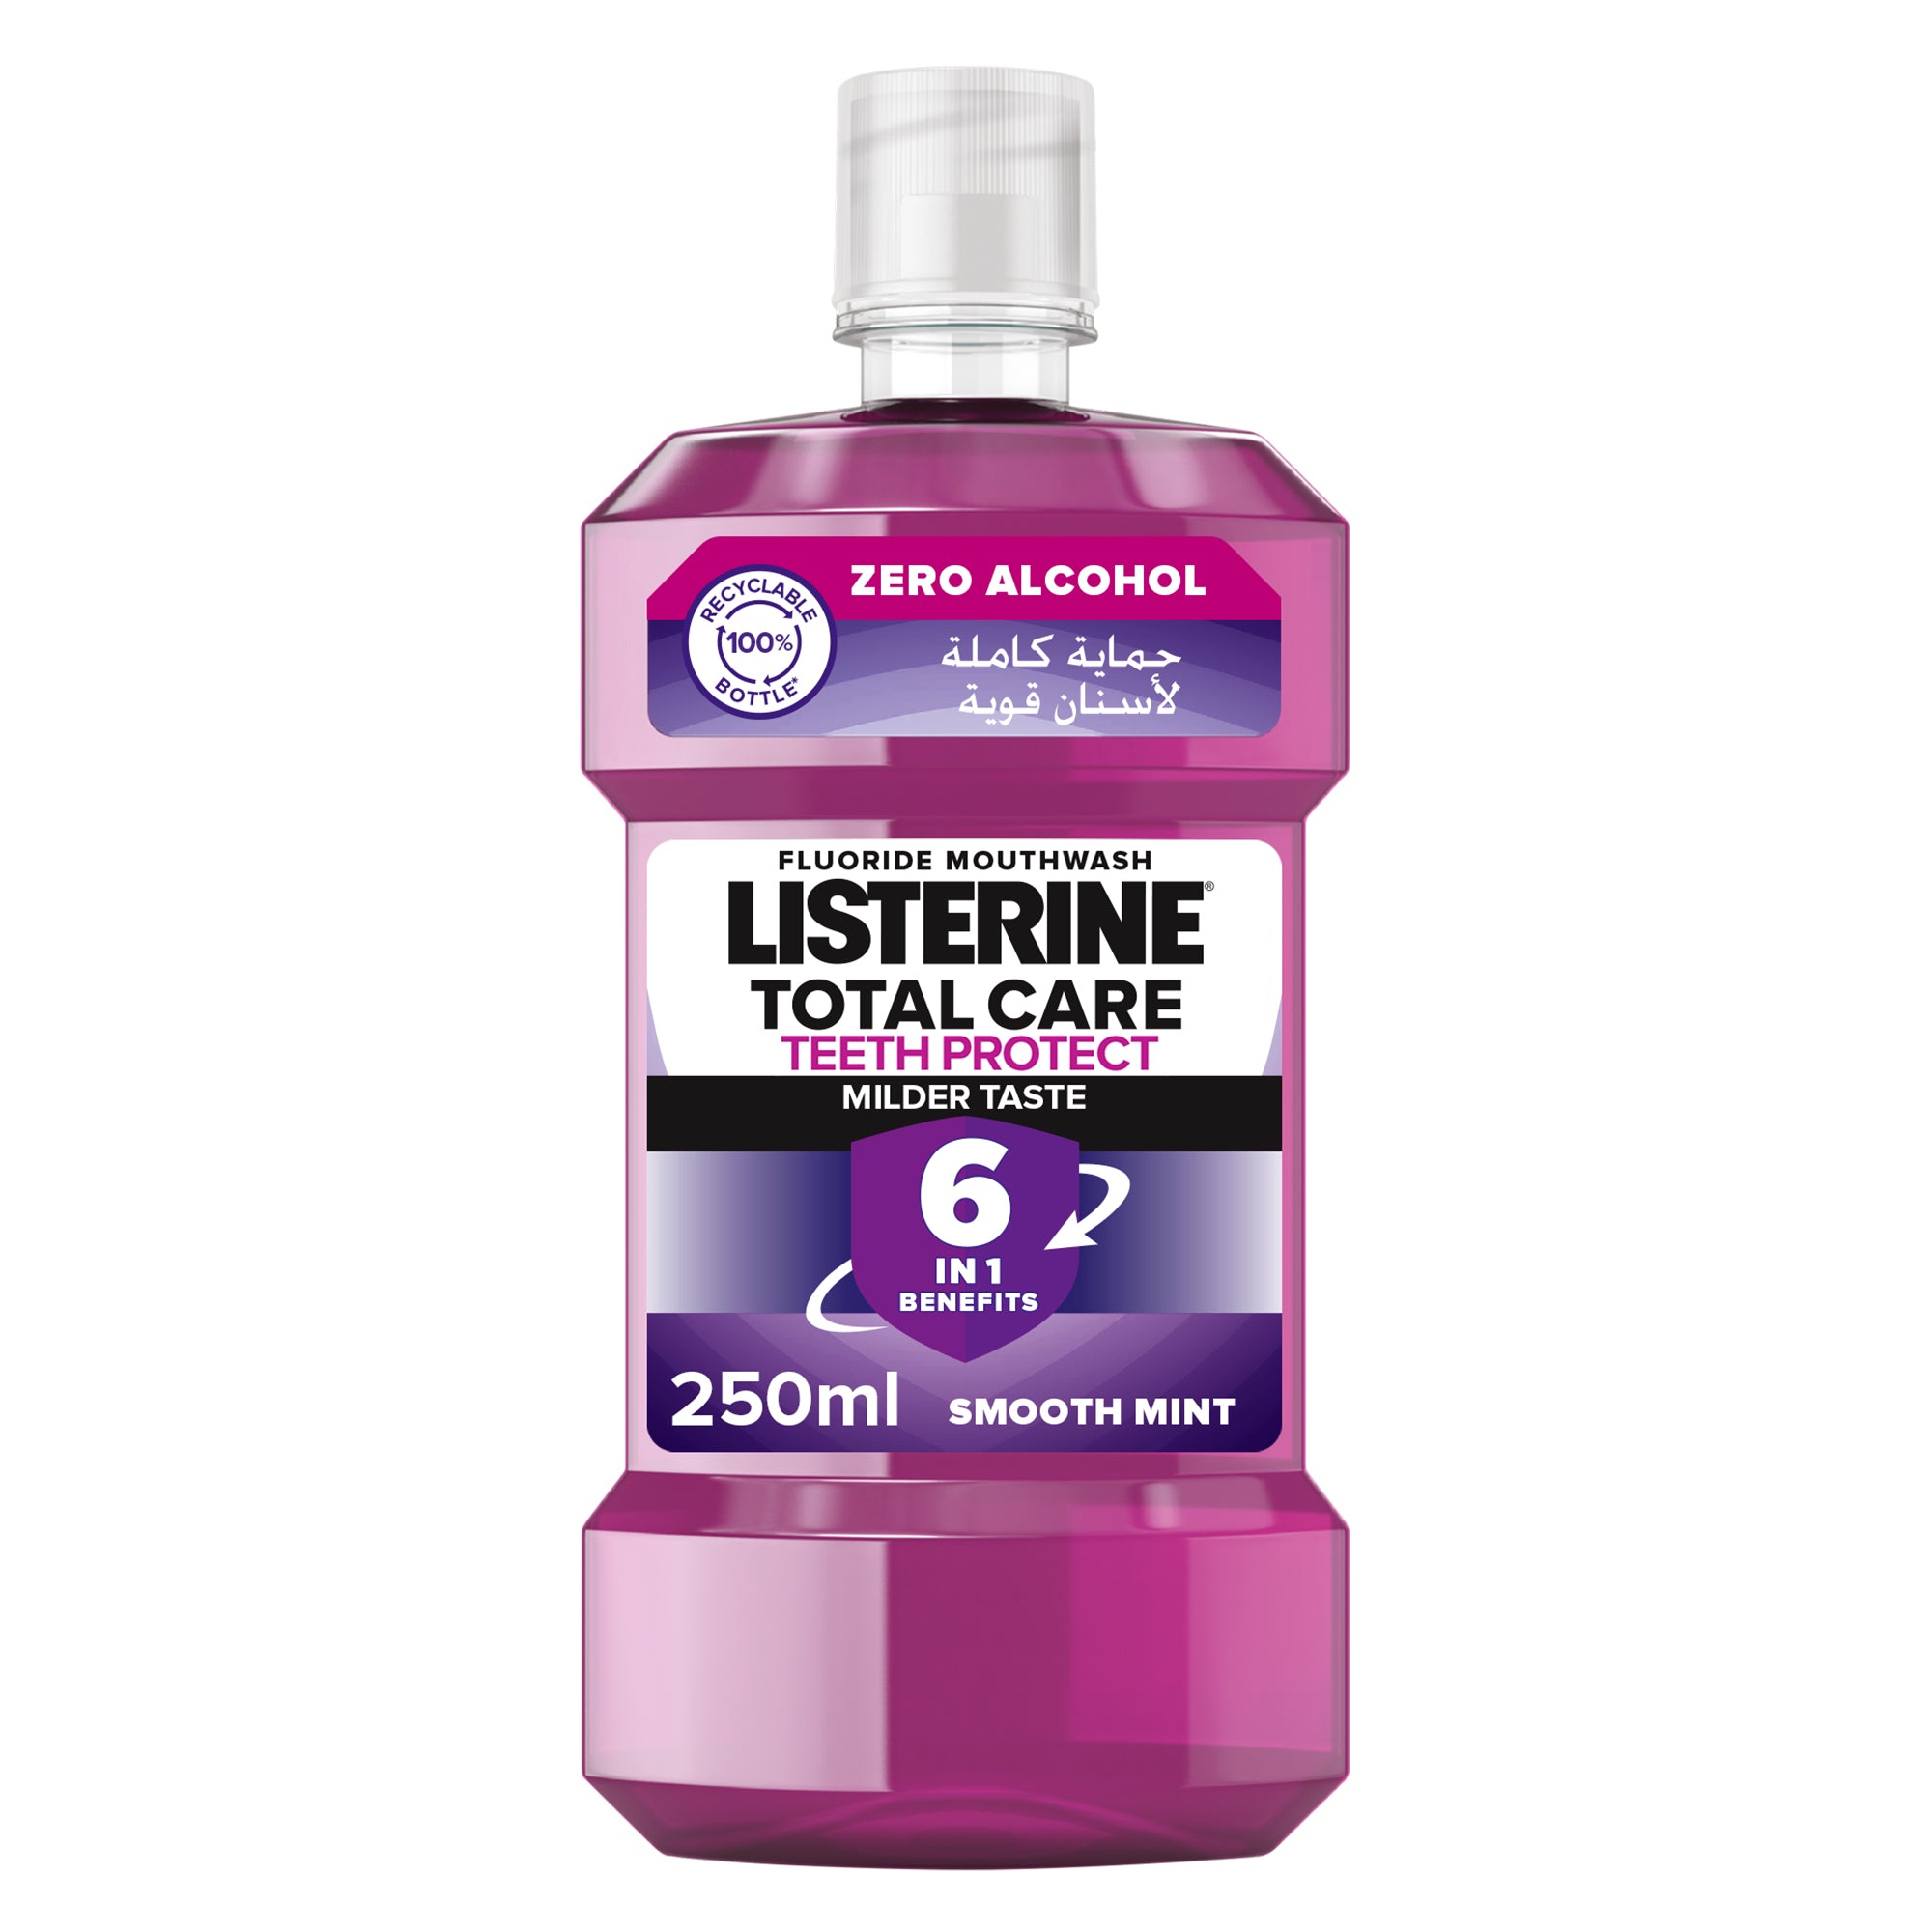 Listerine Total Care - Mouthwash 6 in 1 Total Care